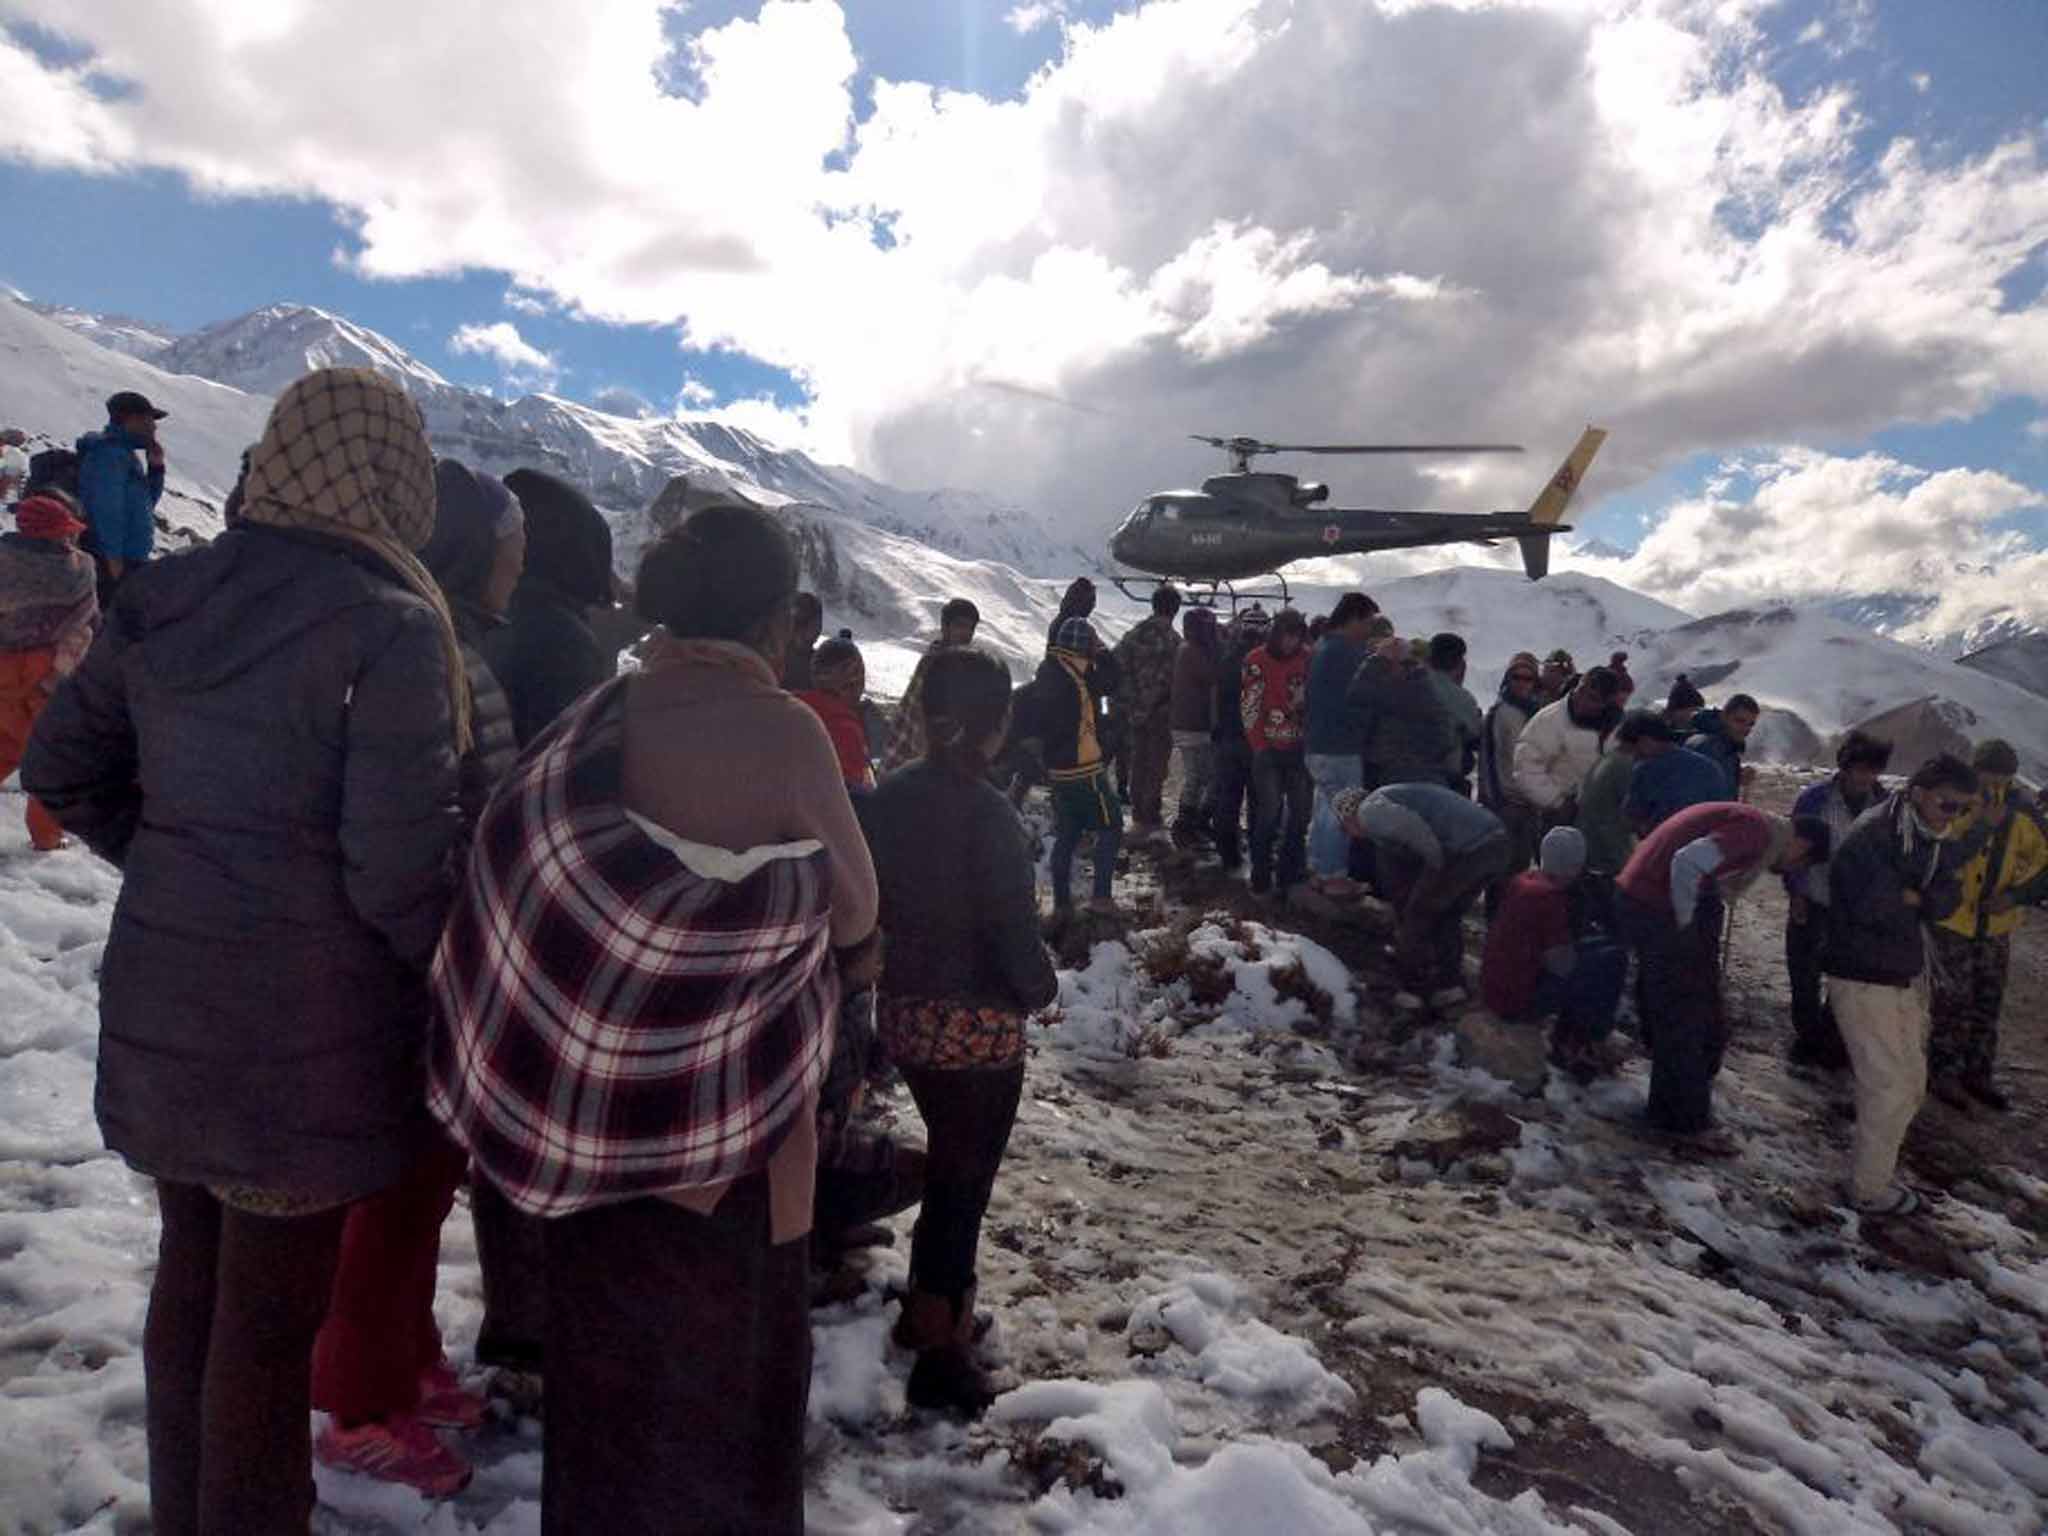 Trekkers had to be rescued from the Annapurna Circuit in Nepal last week